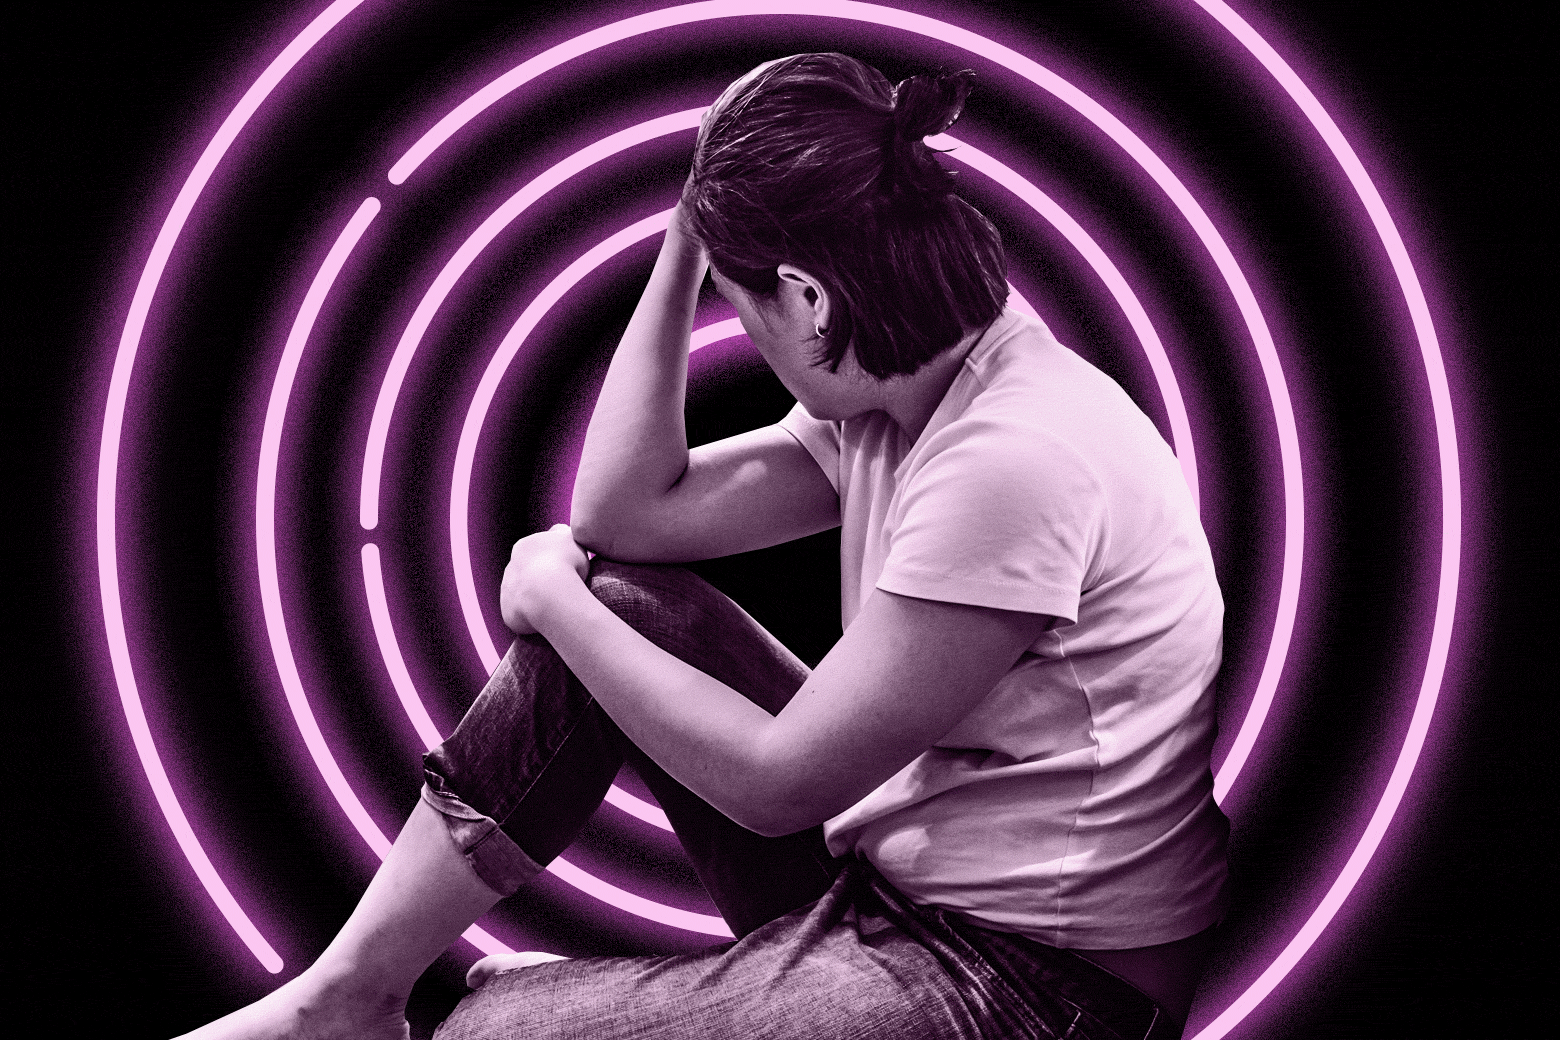 Woman sitting down with her head in her hands in front of flashing circles